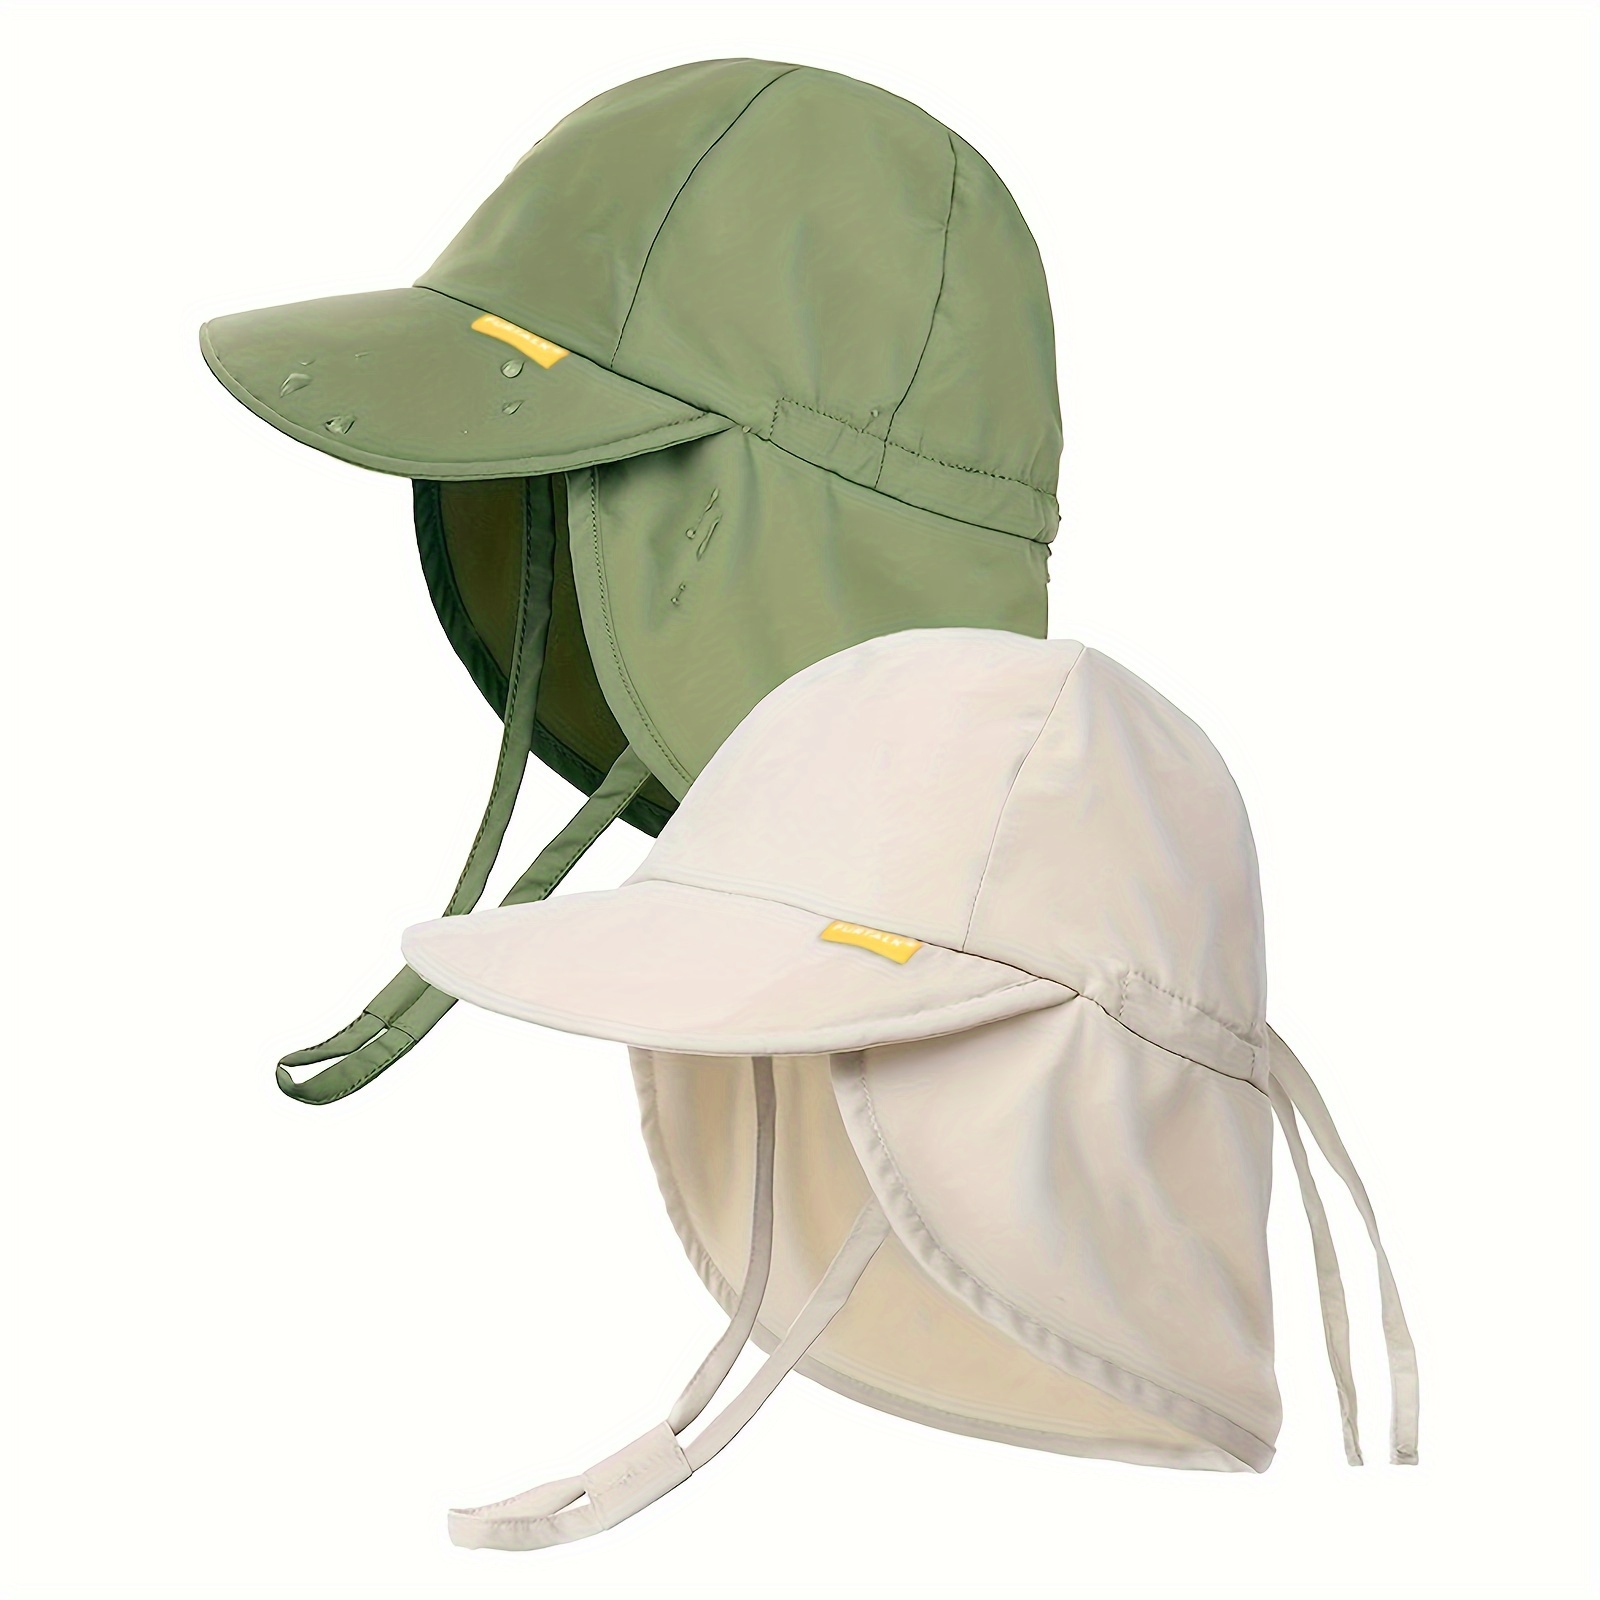 Bucket Hat Smile Embroidered Hats Fisherman Sunshade Caps for Women-MZ6703  S149 